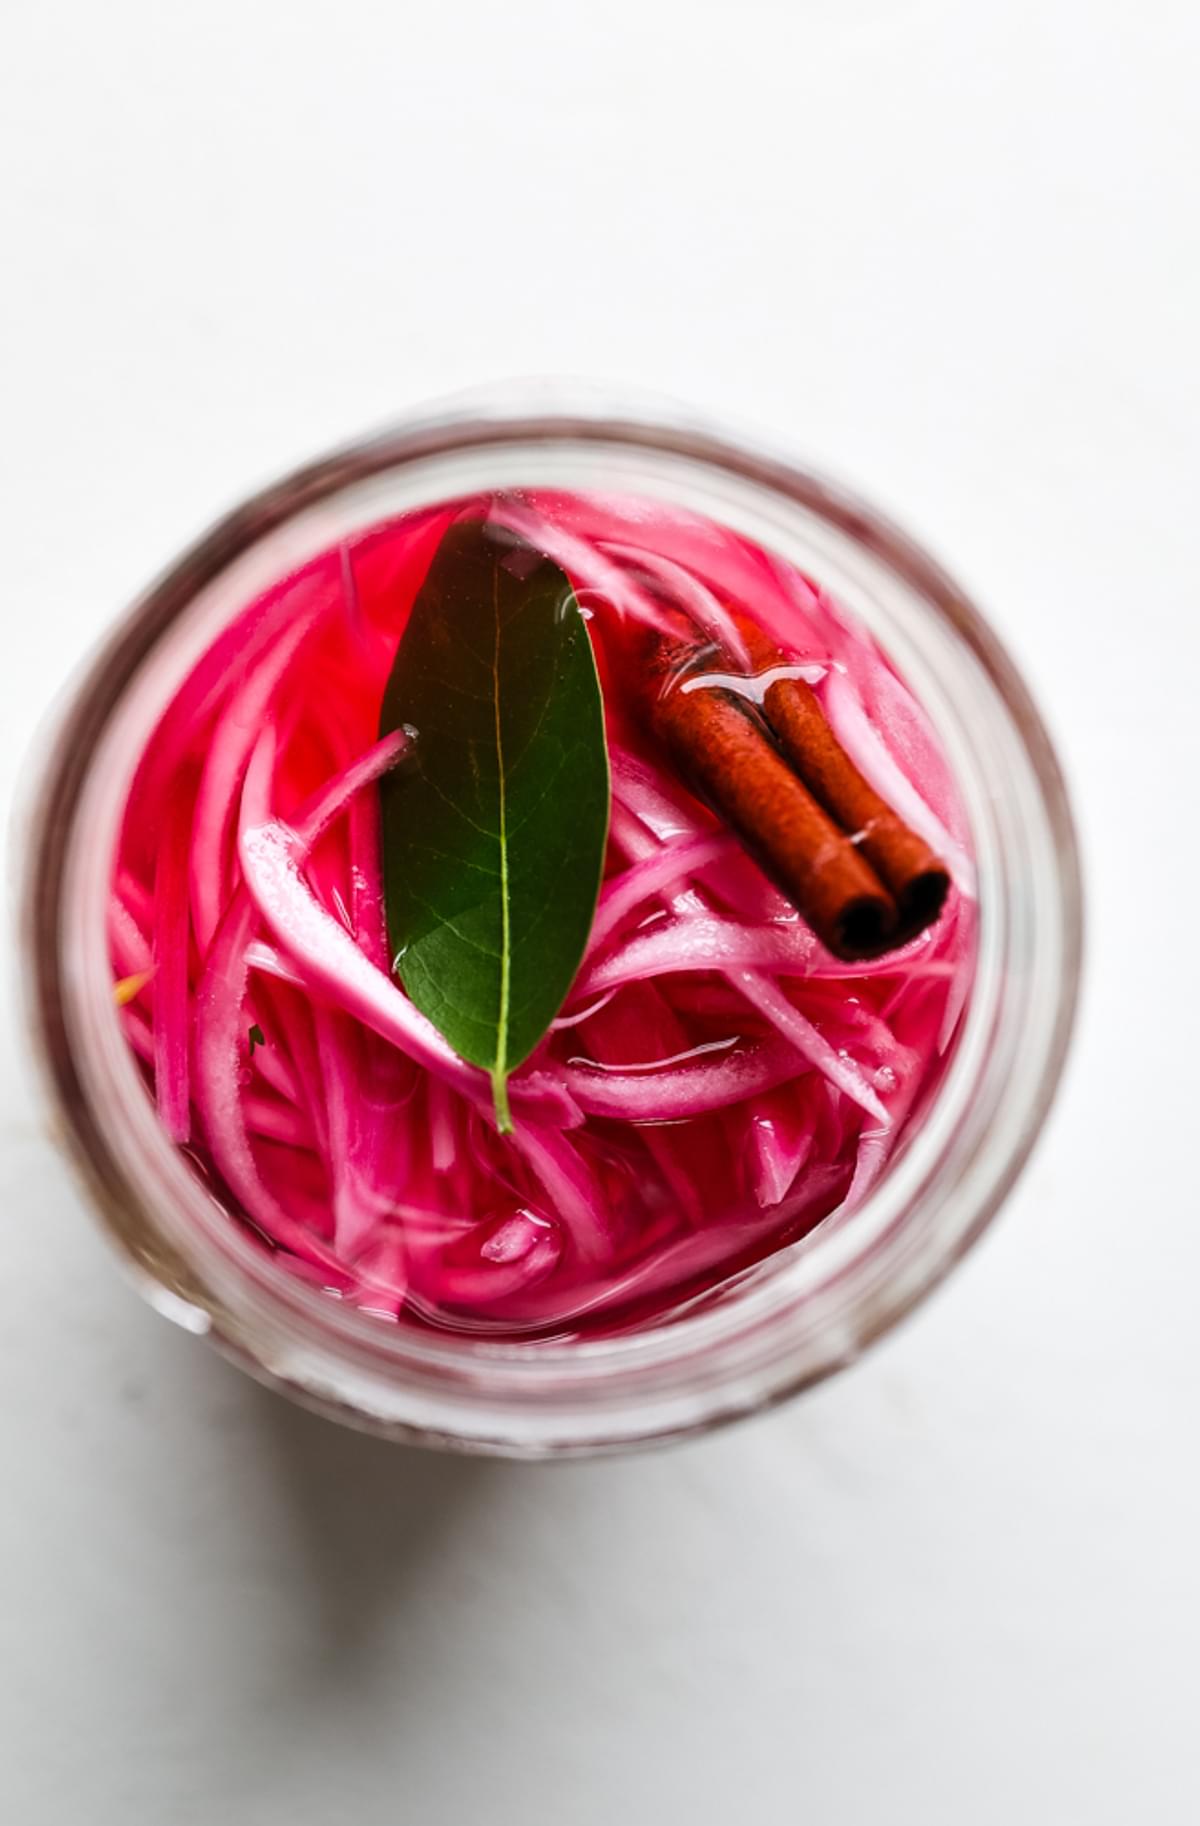 homemade pickled red onions in a jar with bay leaf, cinnamon